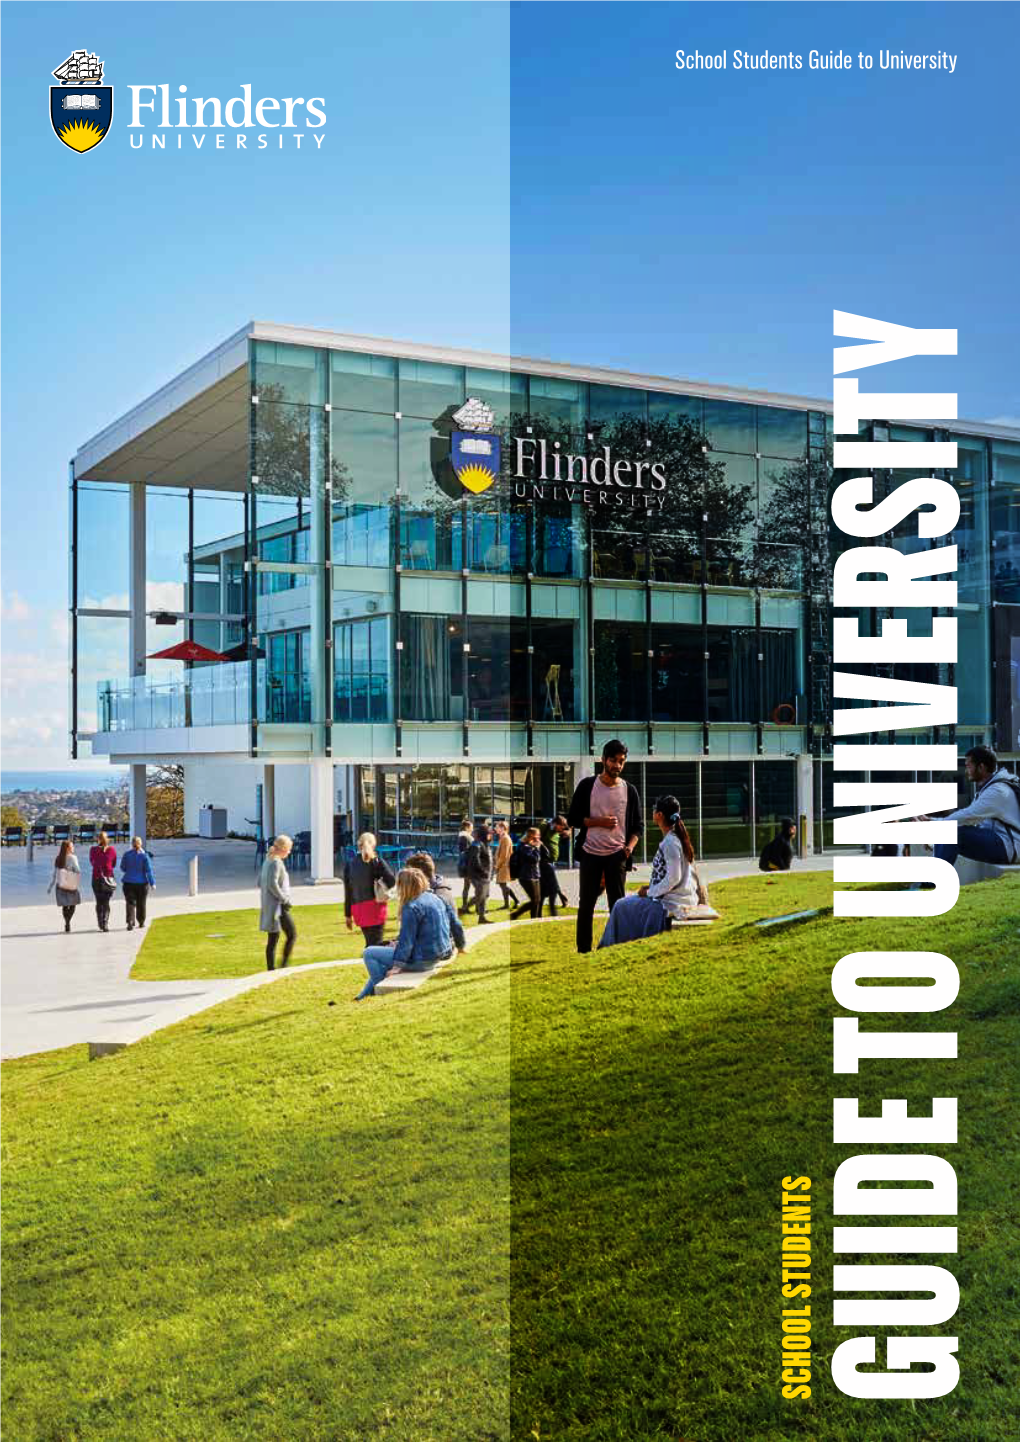 School Students Guide to University (PDF)